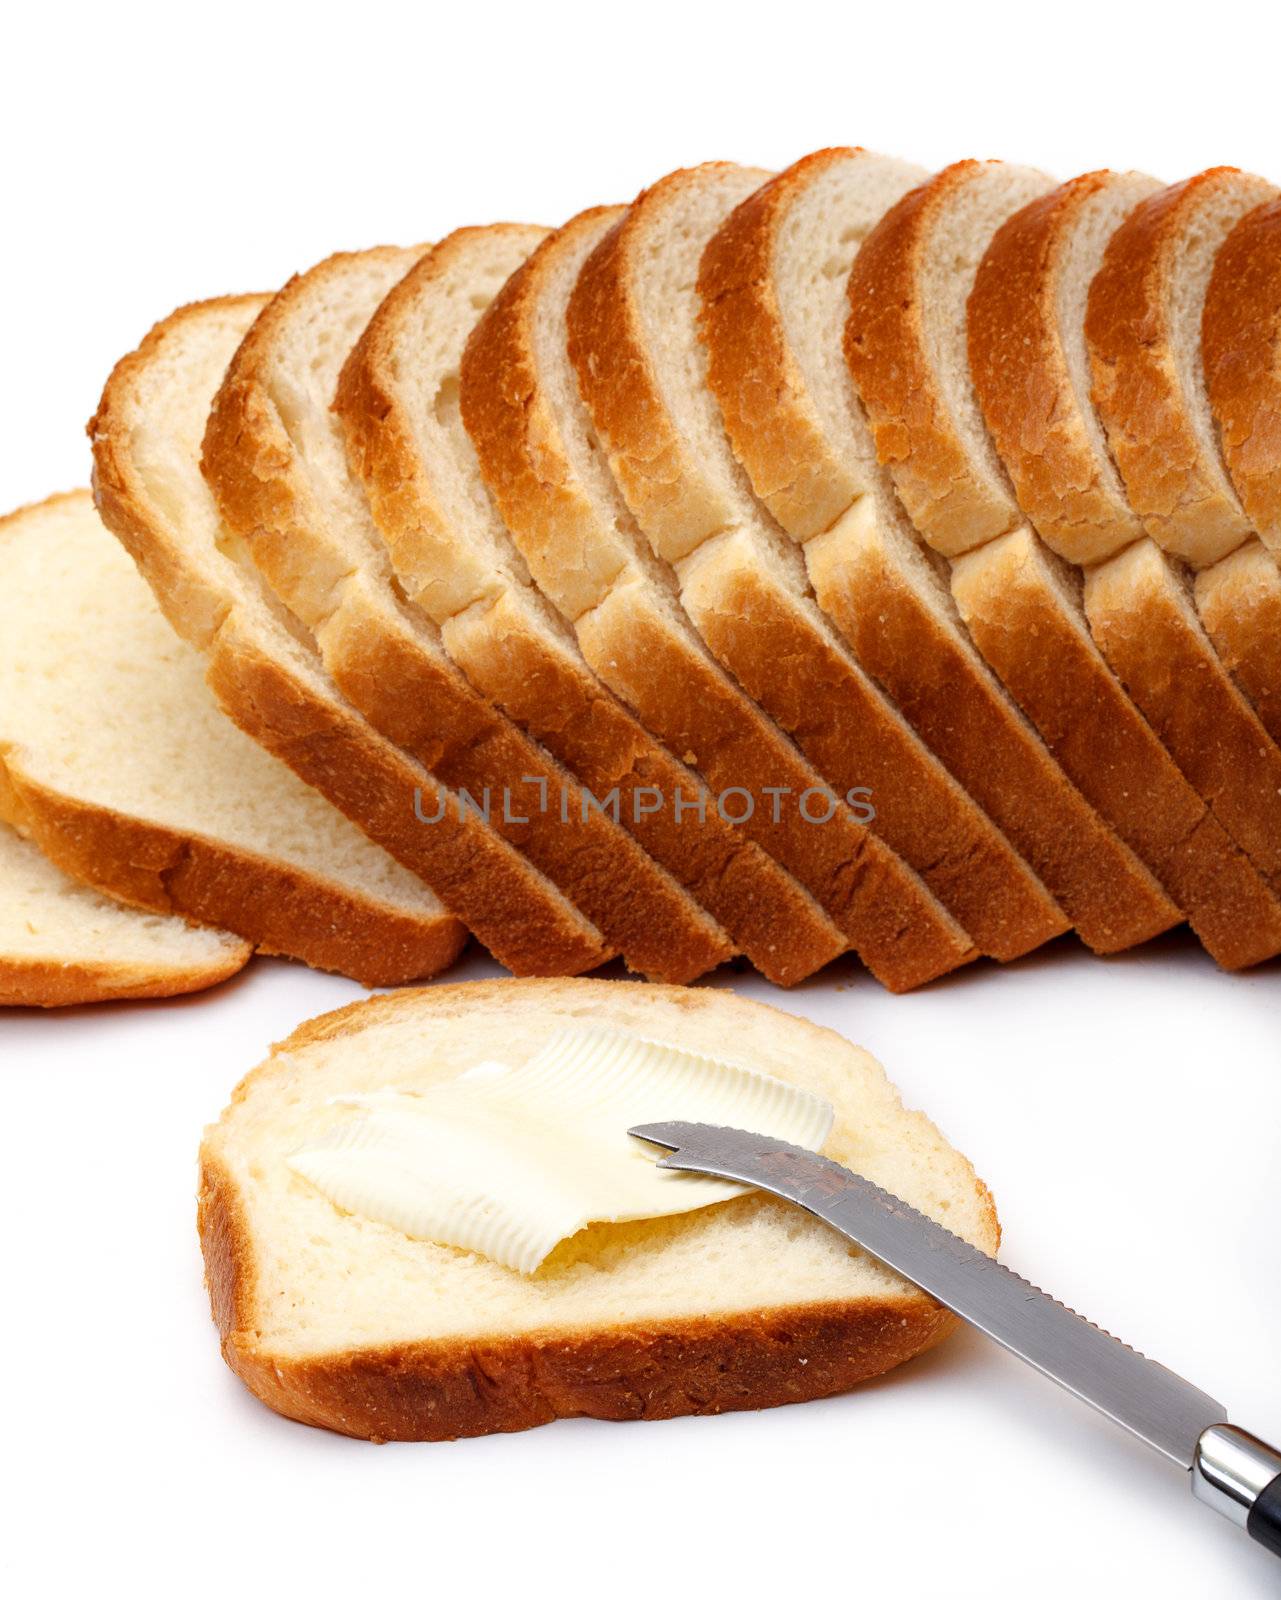 Slices of Wheat Bread with Butter by Discovod